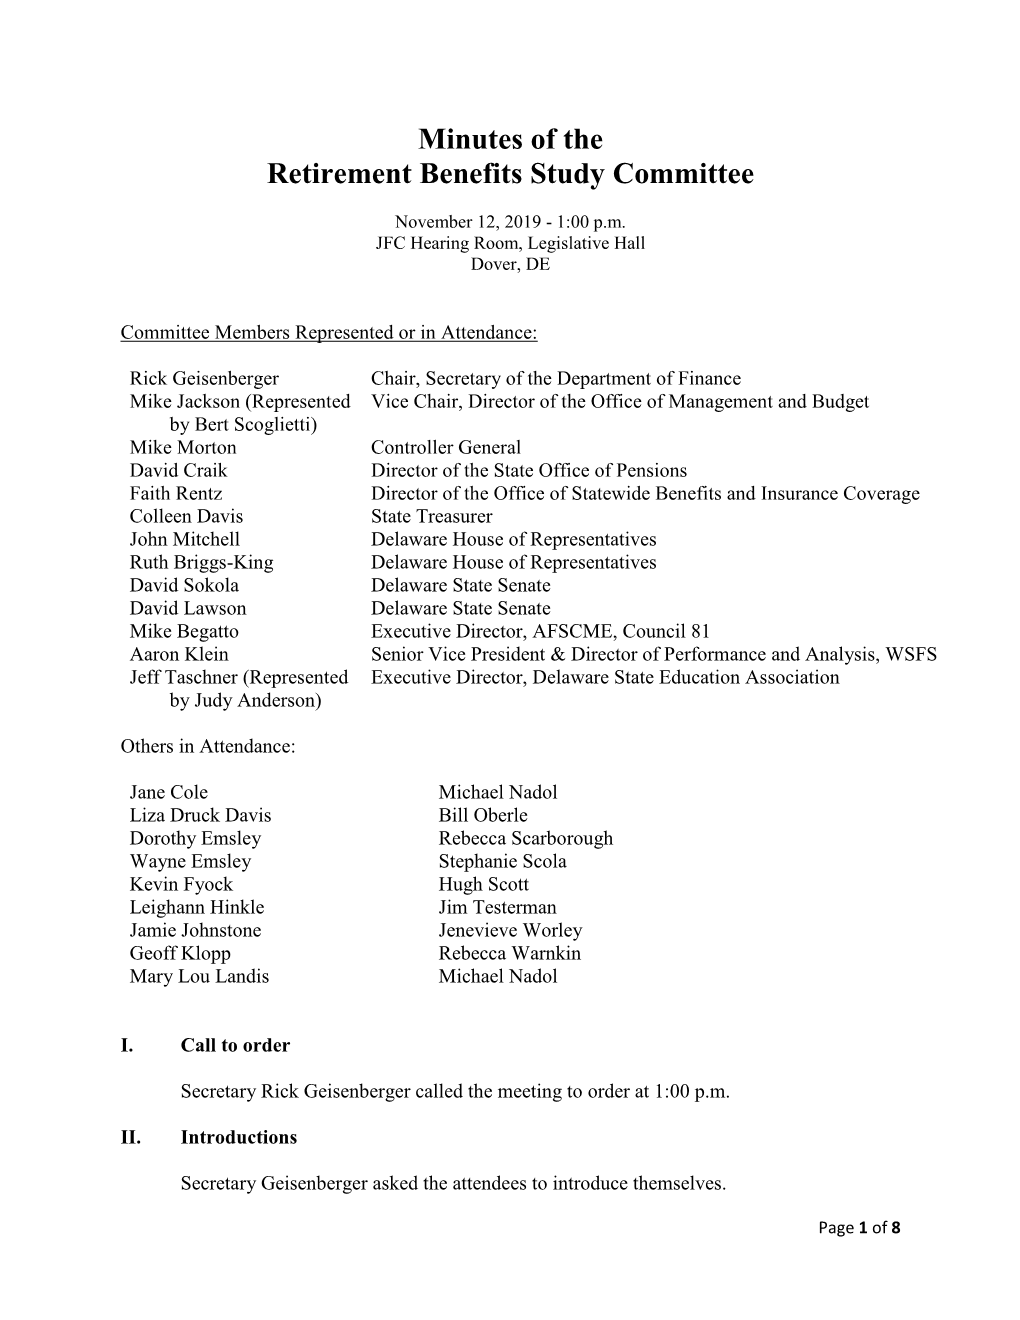 Minutes of the Retirement Benefits Study Committee